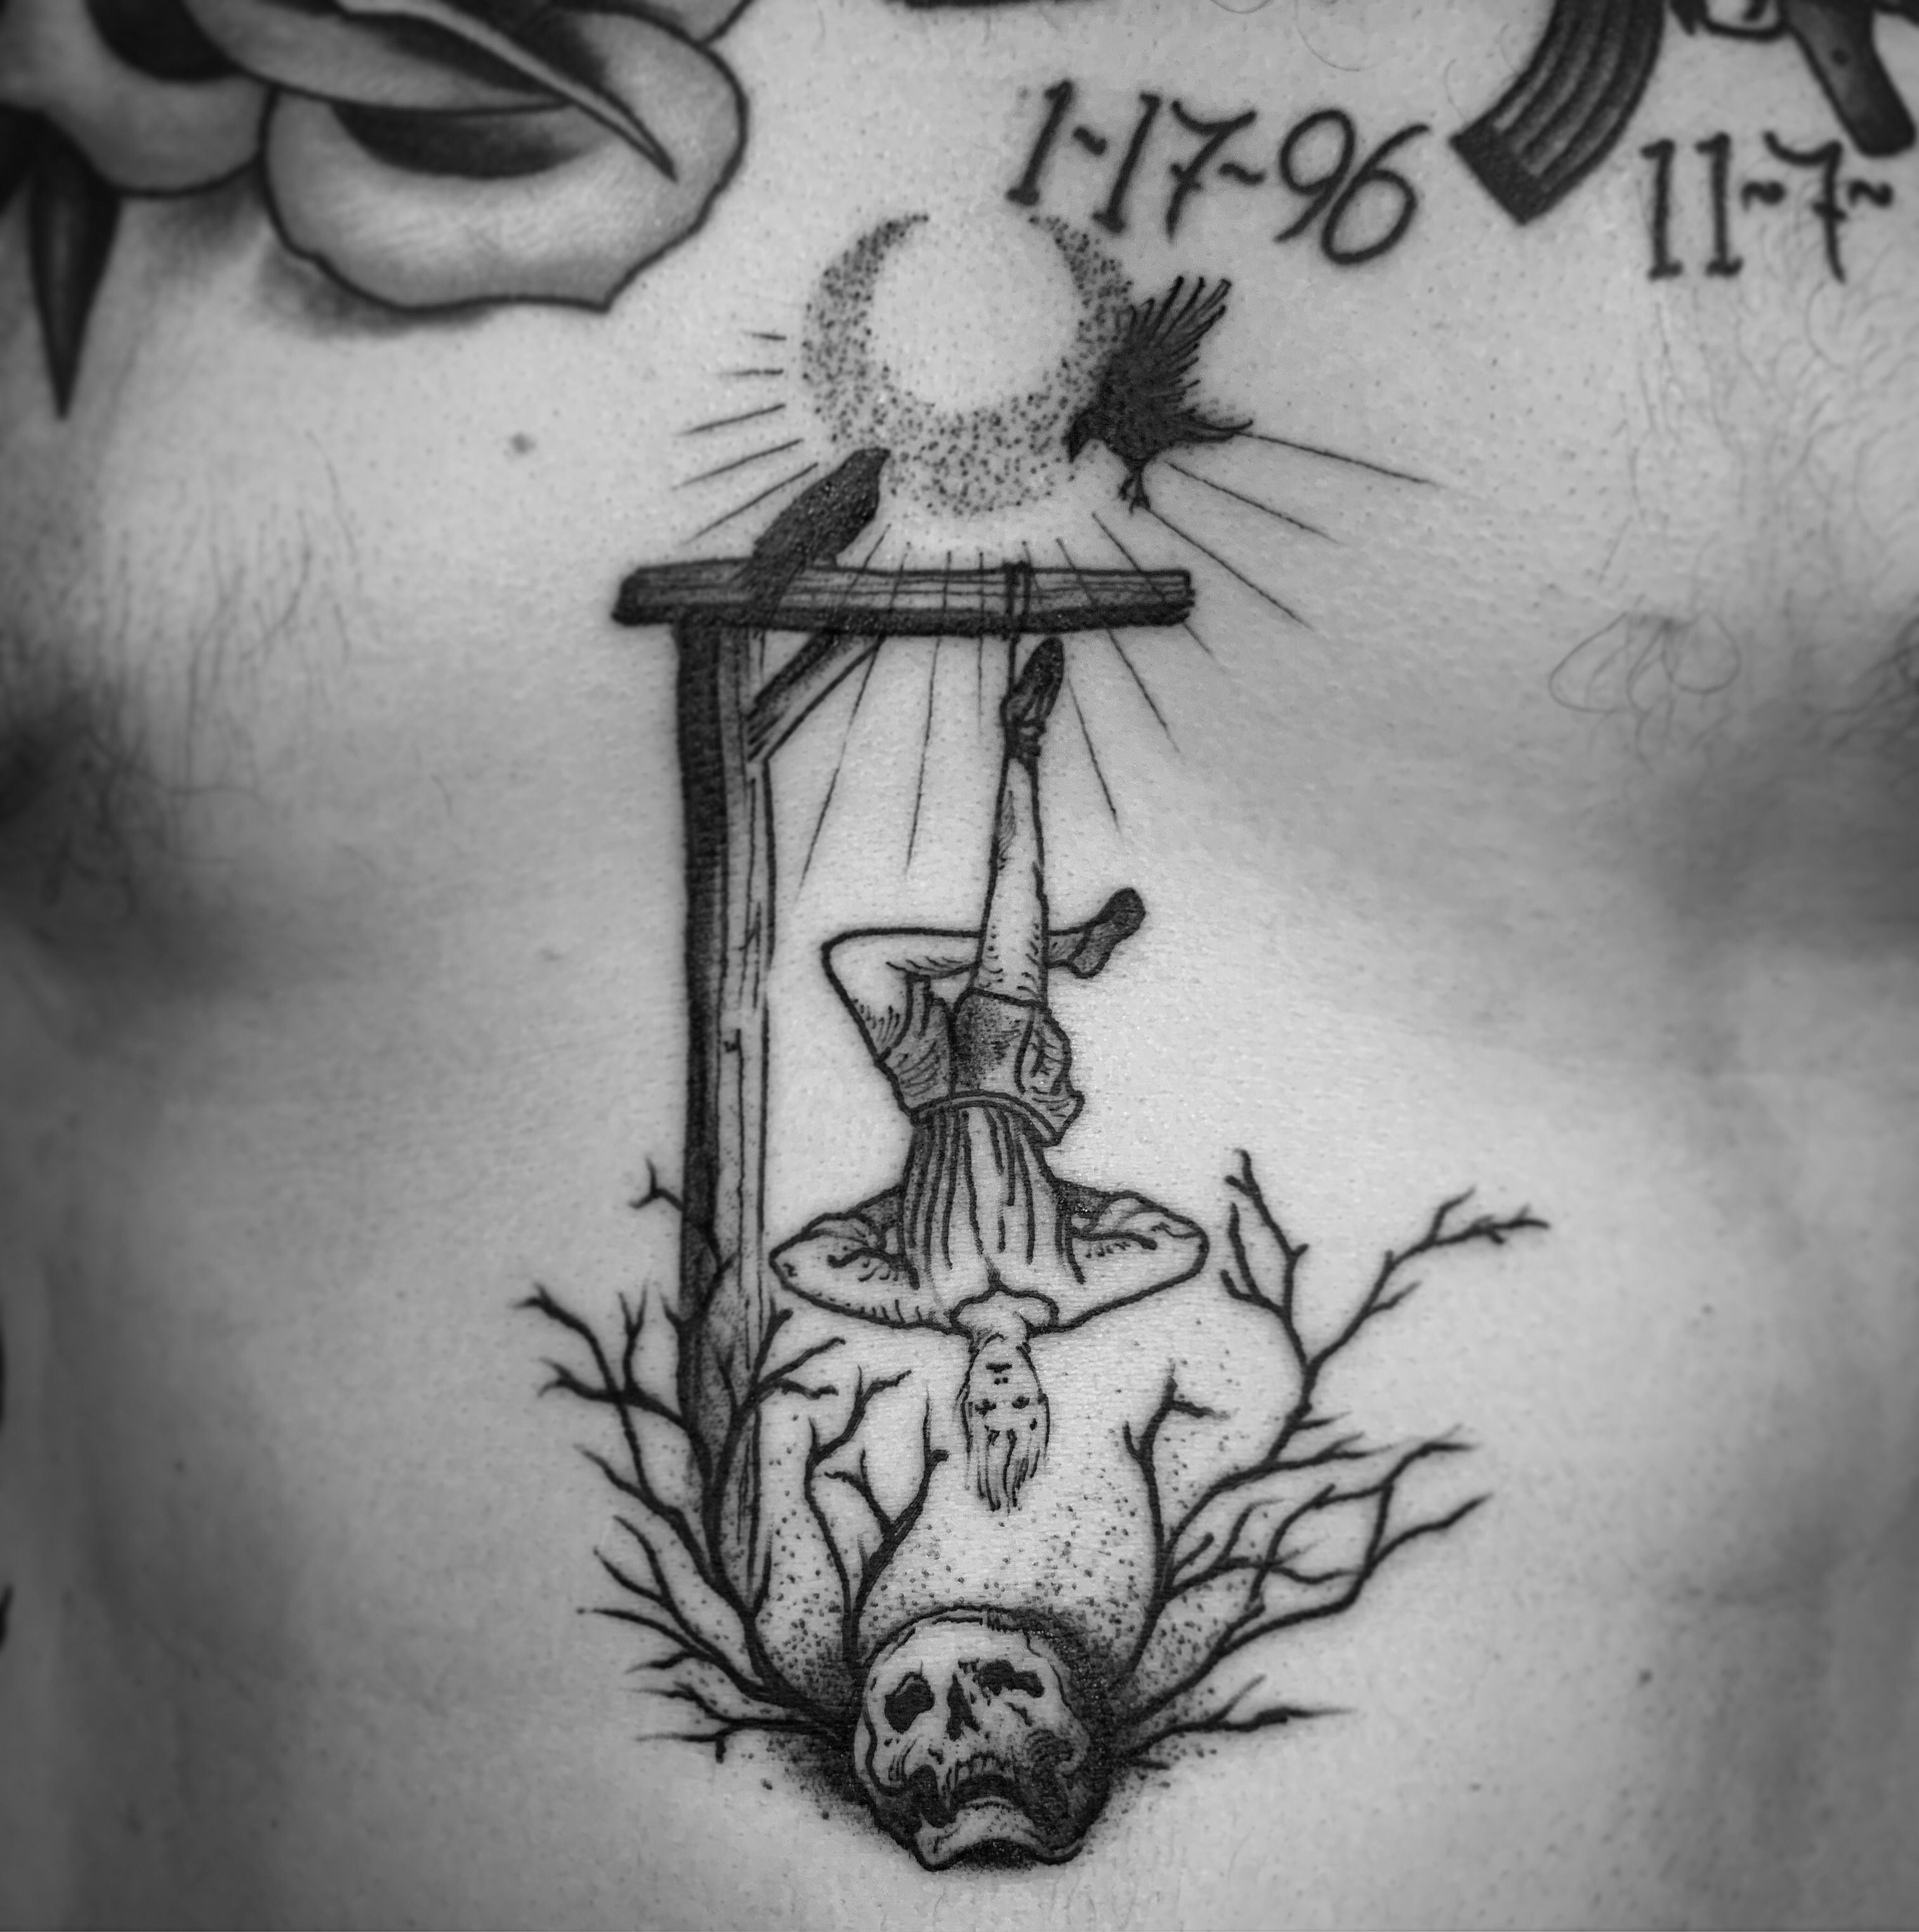 Phil TwoRavens Tattoo  The Hanged Man  thanks Cat Done  thistleandsnowstudio  Facebook